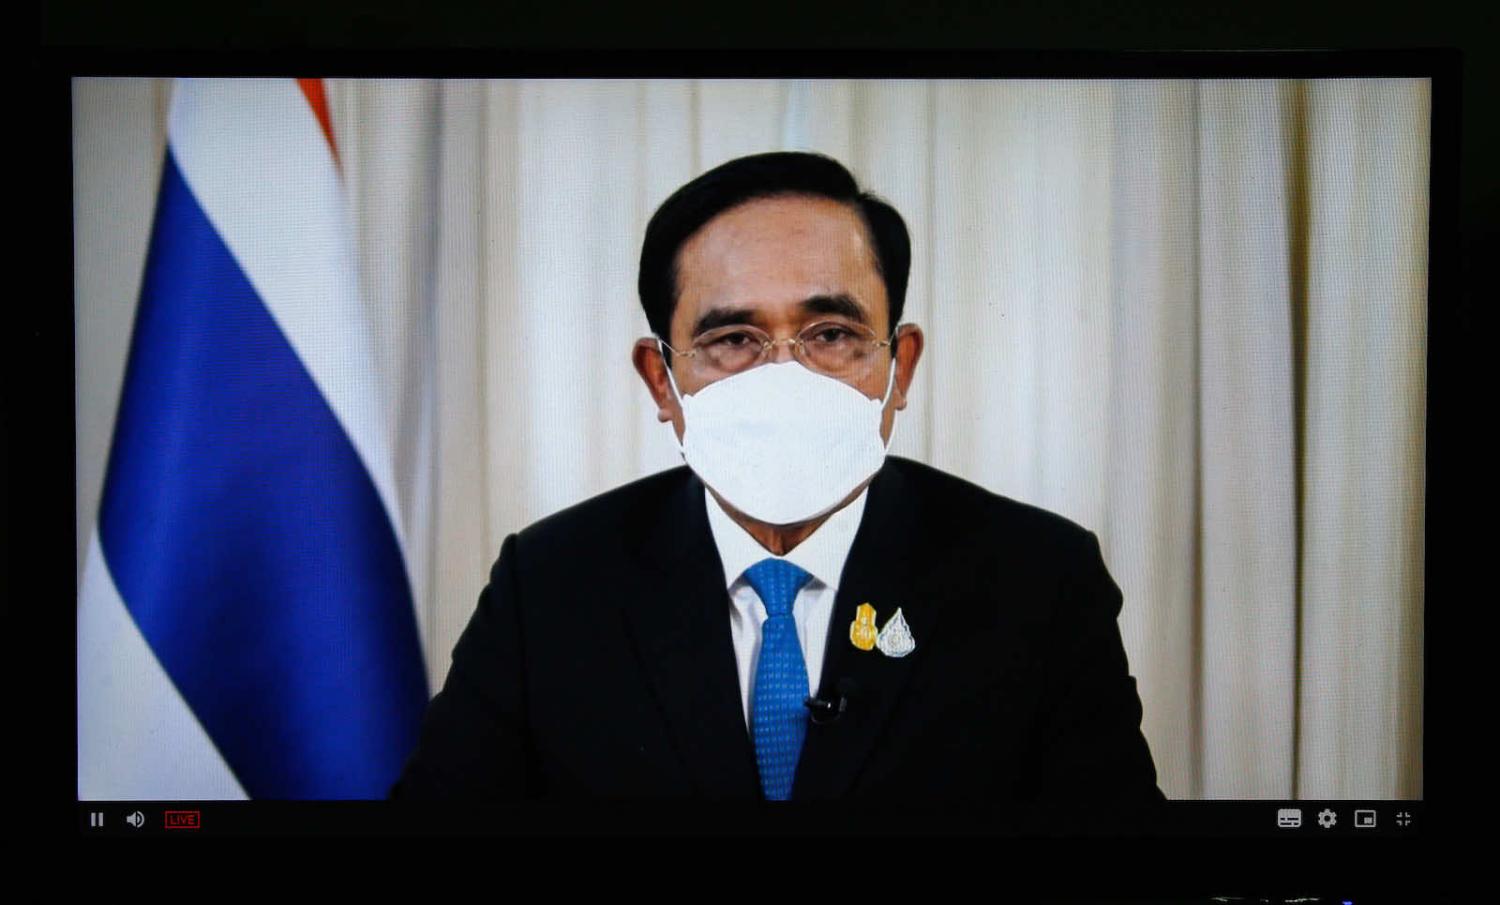 Thailand’s Prime Minister Prayuth Chan O-Cha making a live-televised speech in November (Chaiwat Subprasom via Getty Images)